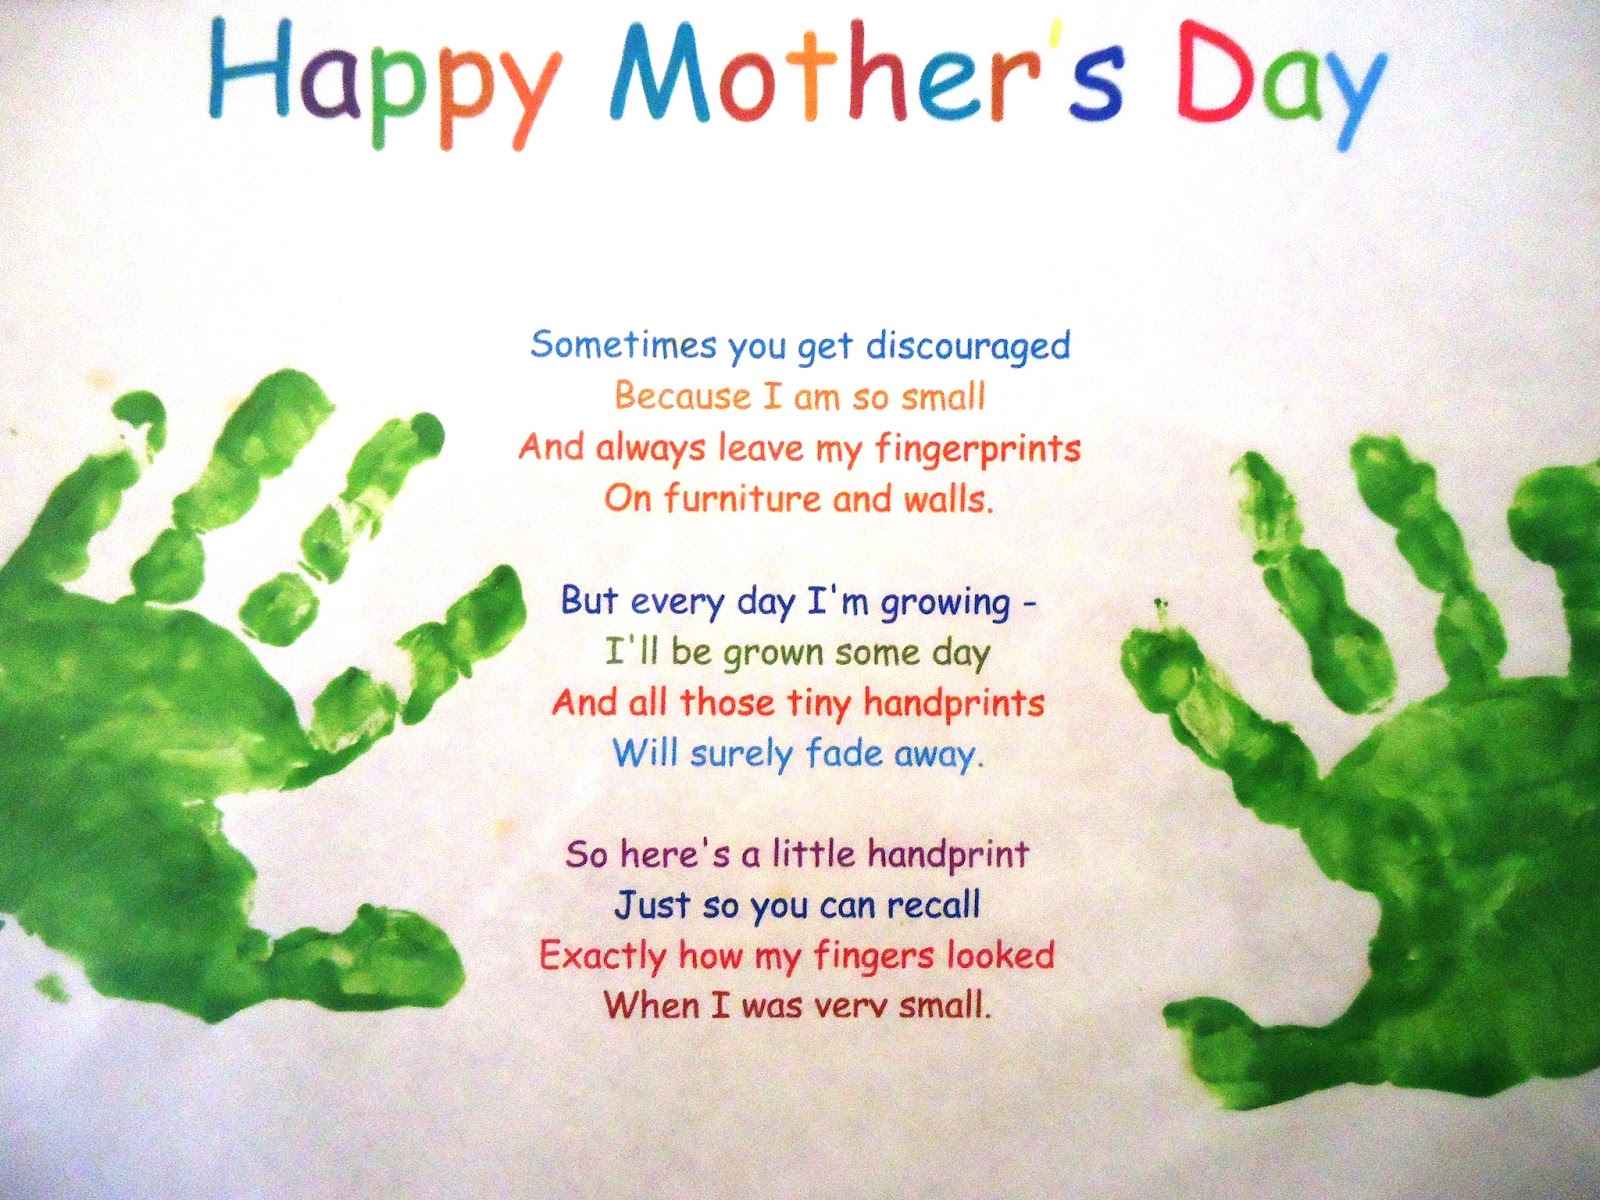 Mother s Day Wallpapers 2017 HD Free Download For Desktop With Quotes & Messages